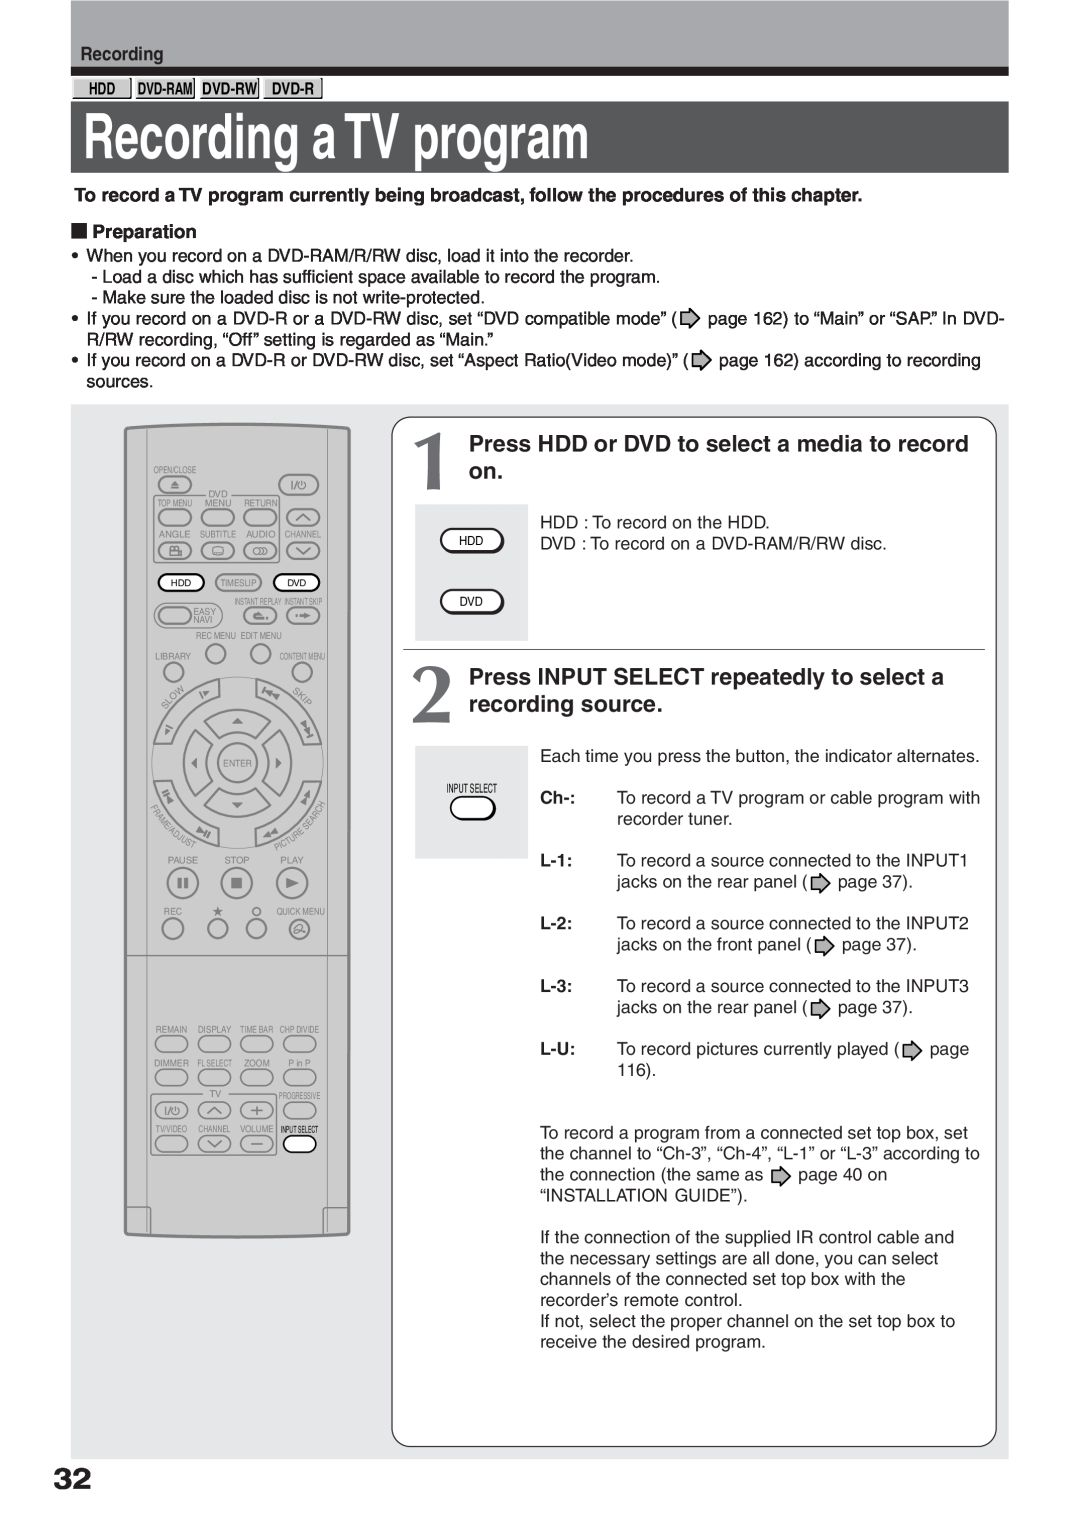 Toshiba RD-XS32SC, RD-XS32SU Recording a TV program, Press HDD or DVD to select a media to record on, Preparation 